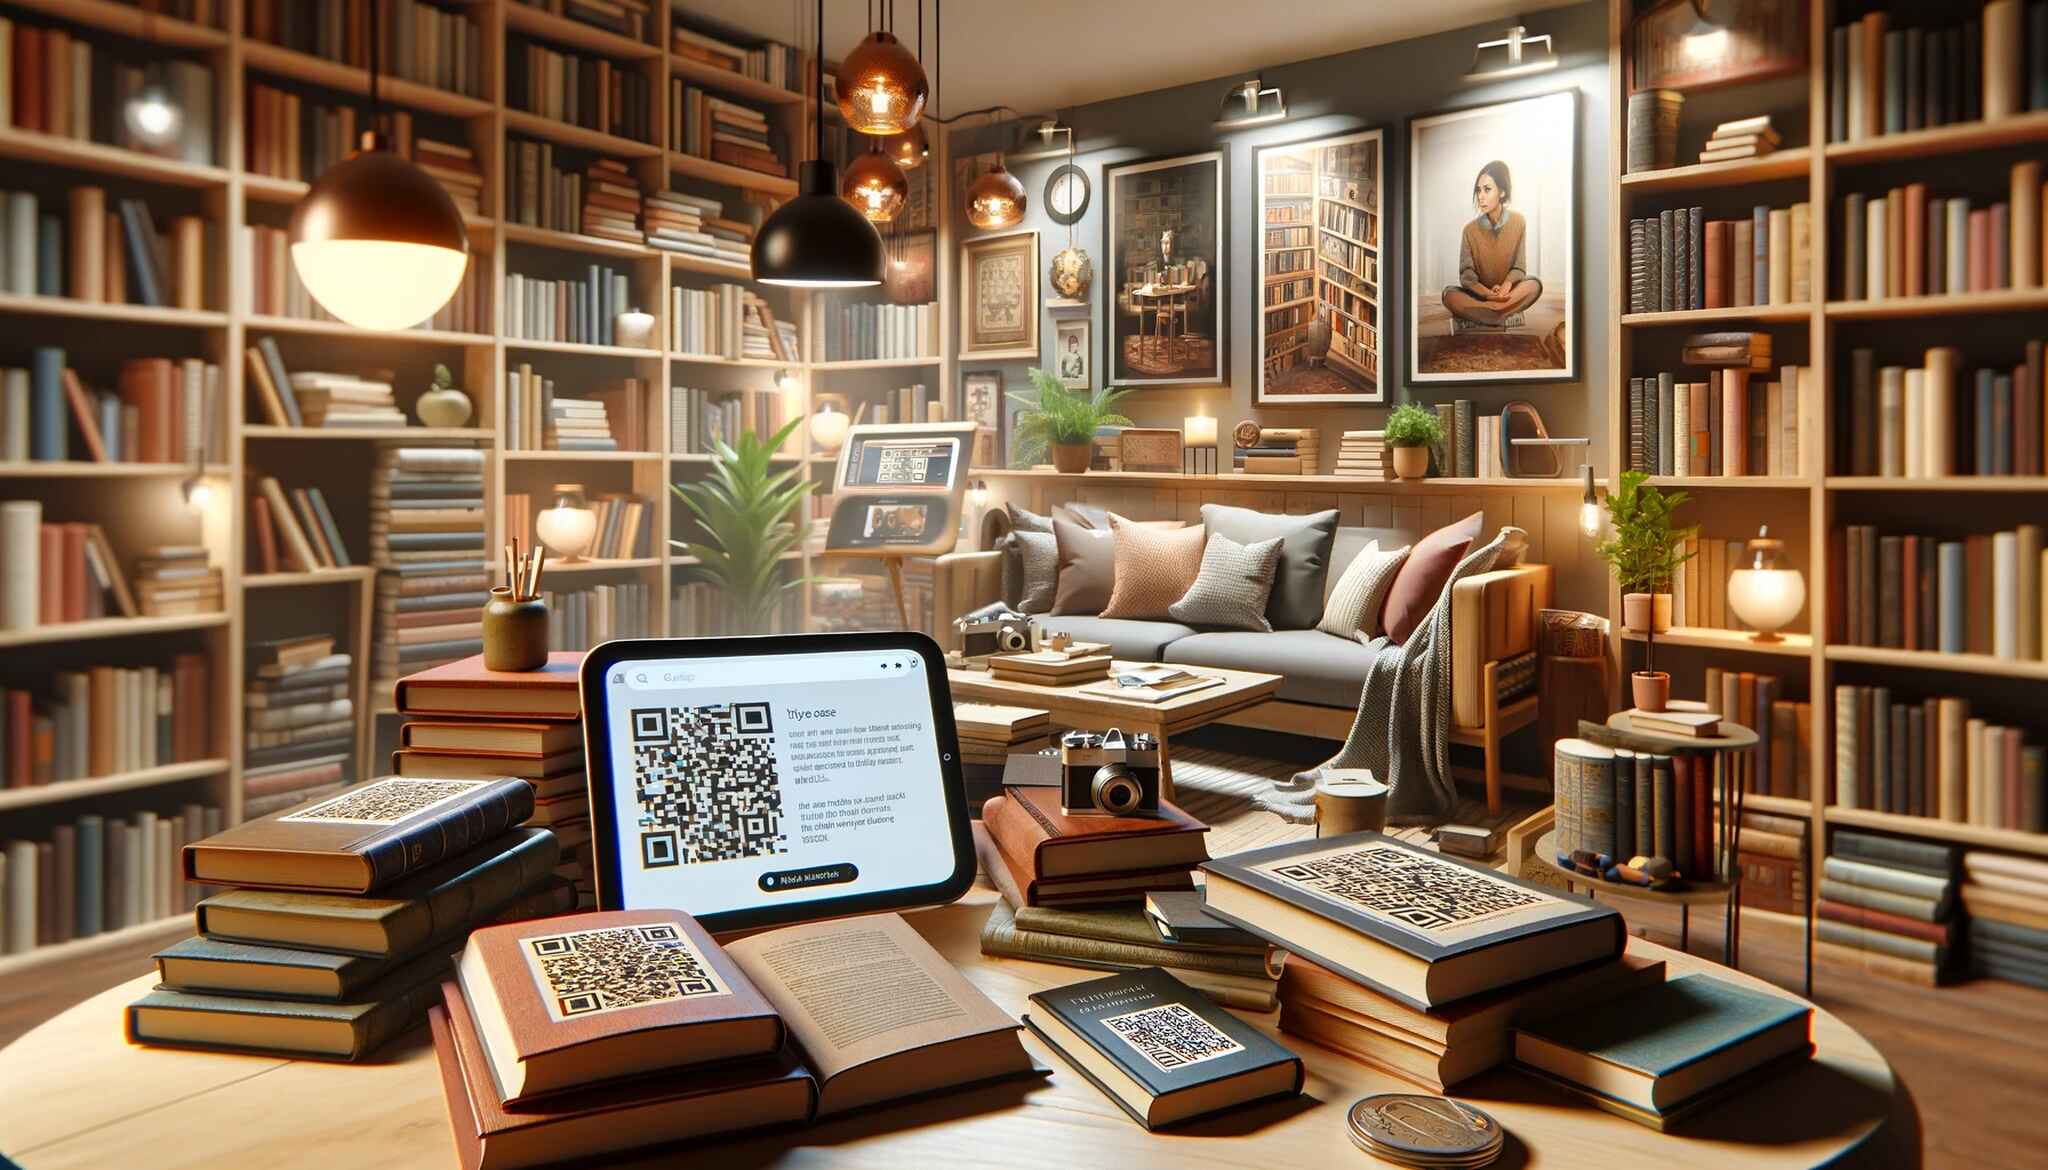 Cozy reading room with various books with QR codes